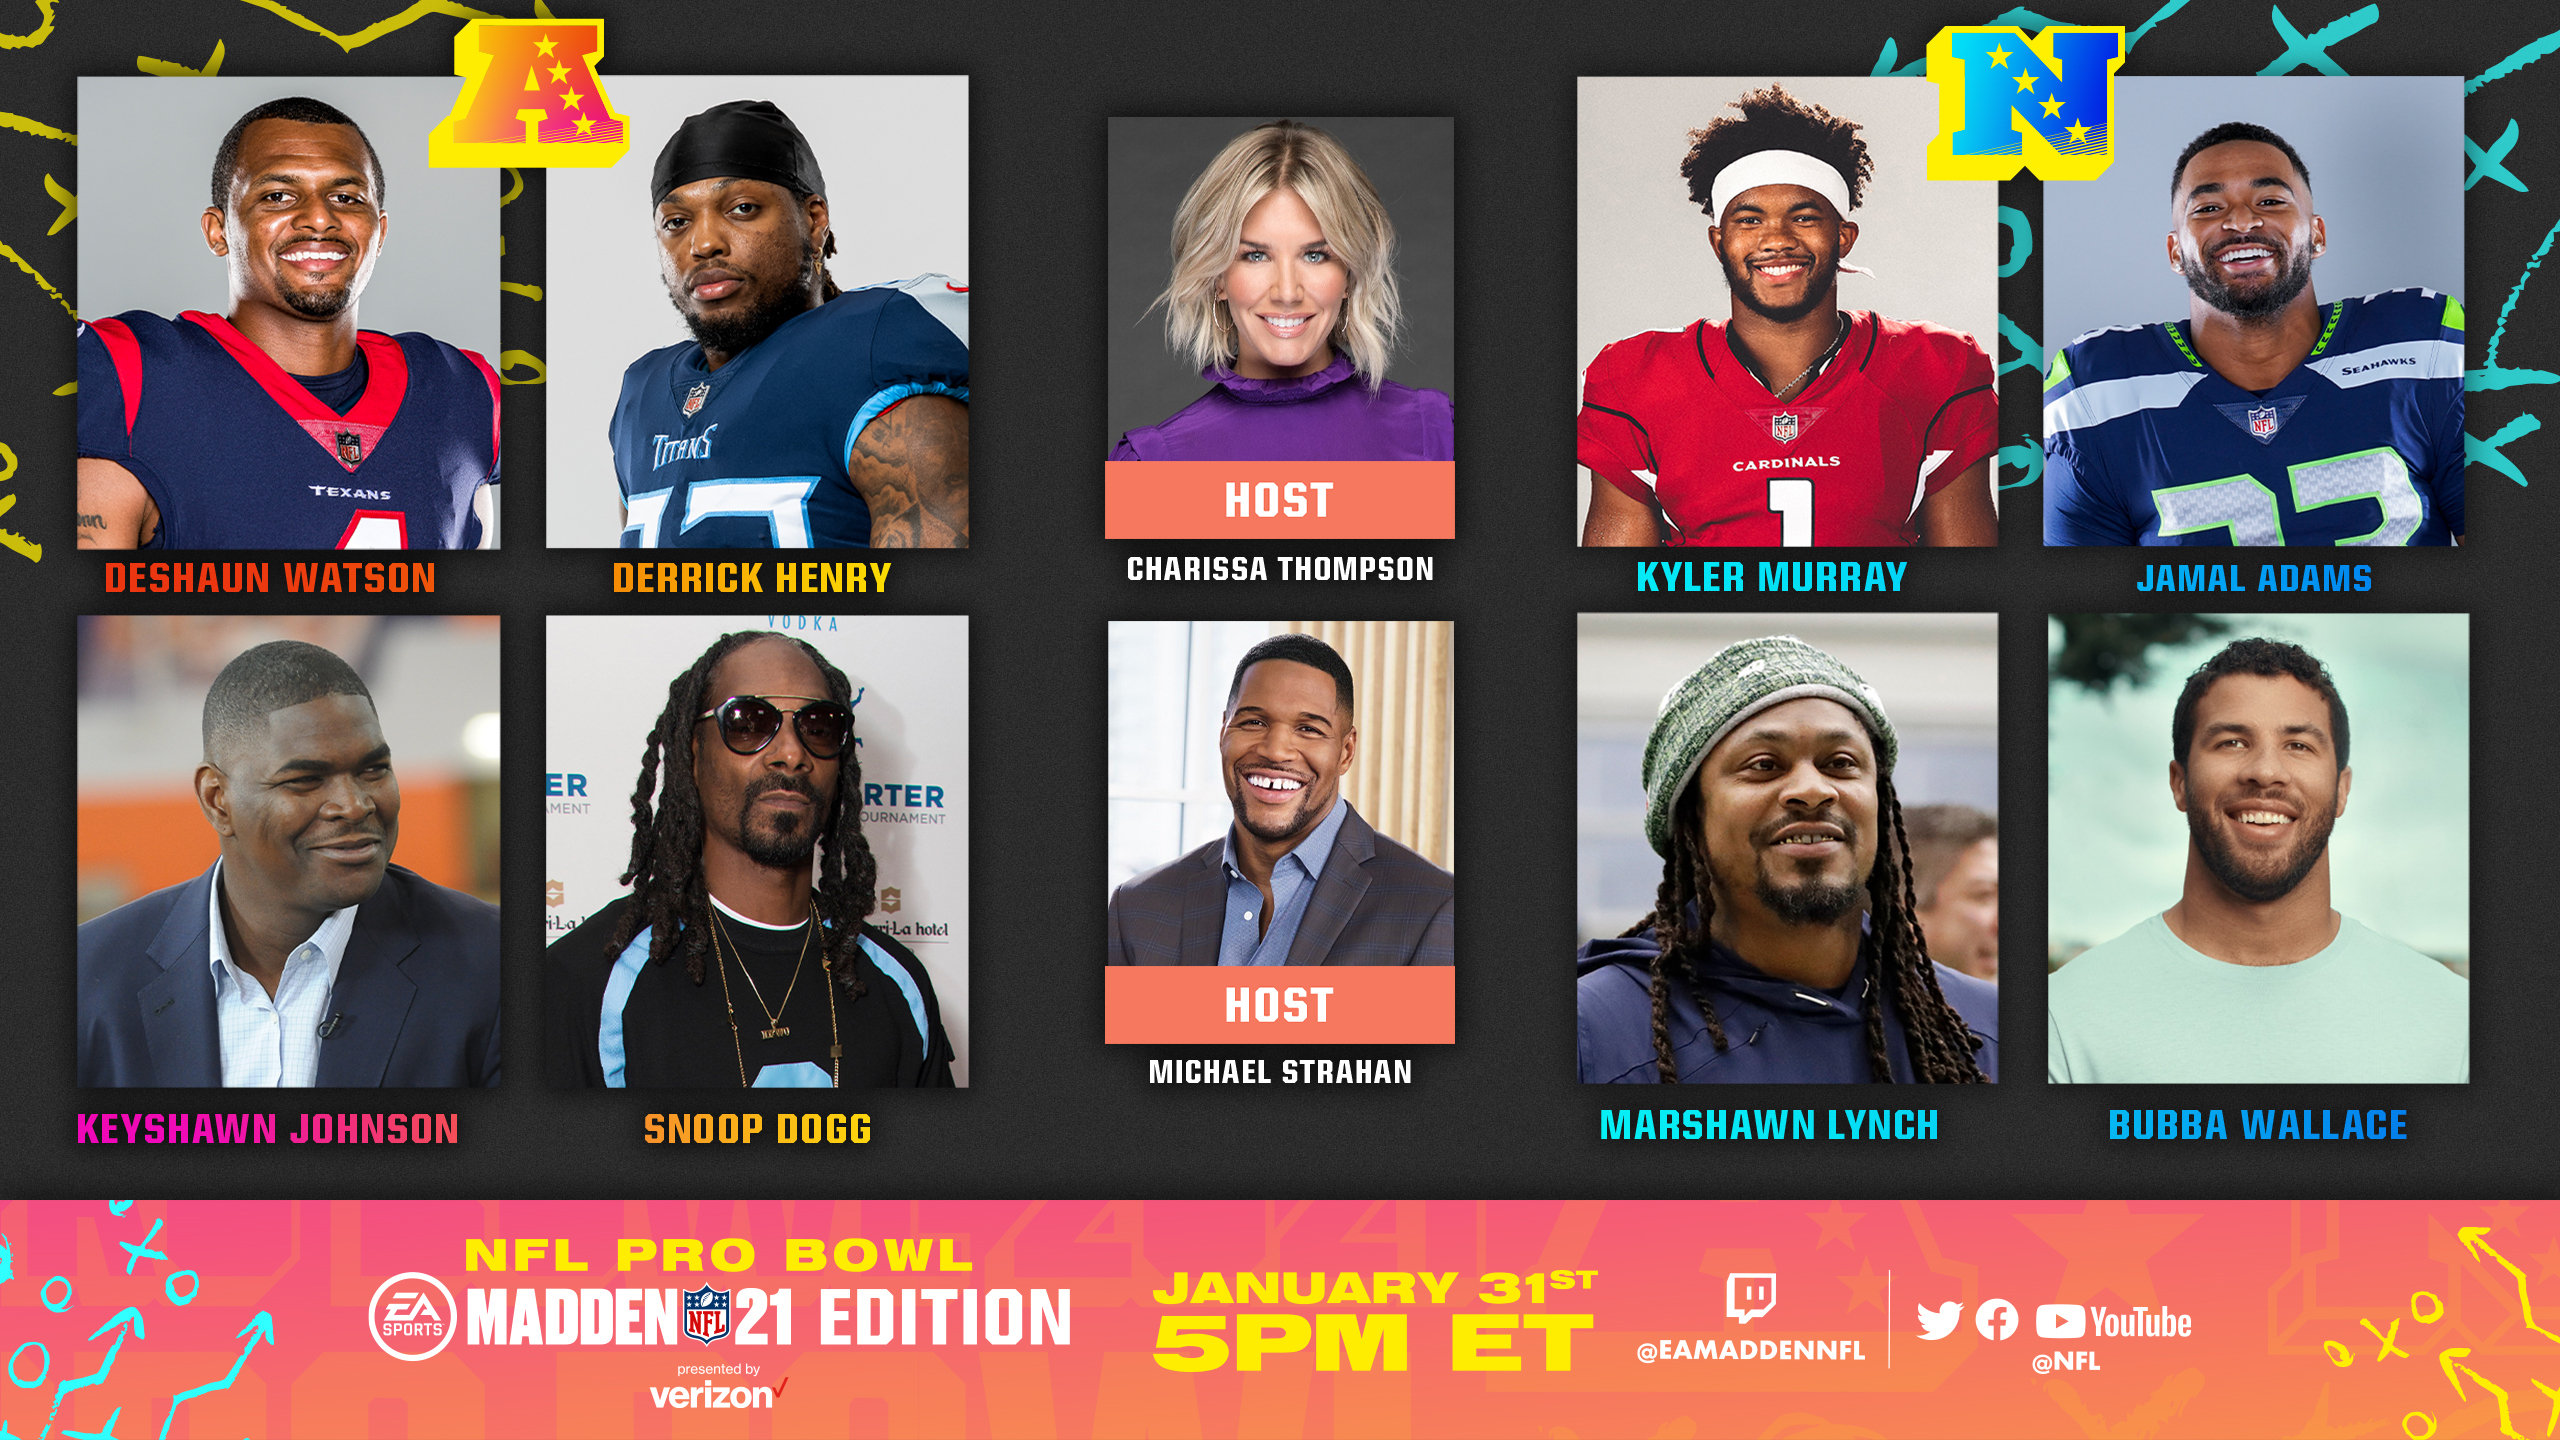 Electronic Arts and the NFL Announce Snoop Dogg, Marshawn Lynch and More to  Compete in Pro Bowl: The Madden NFL 21 Edition Presented by Verizon